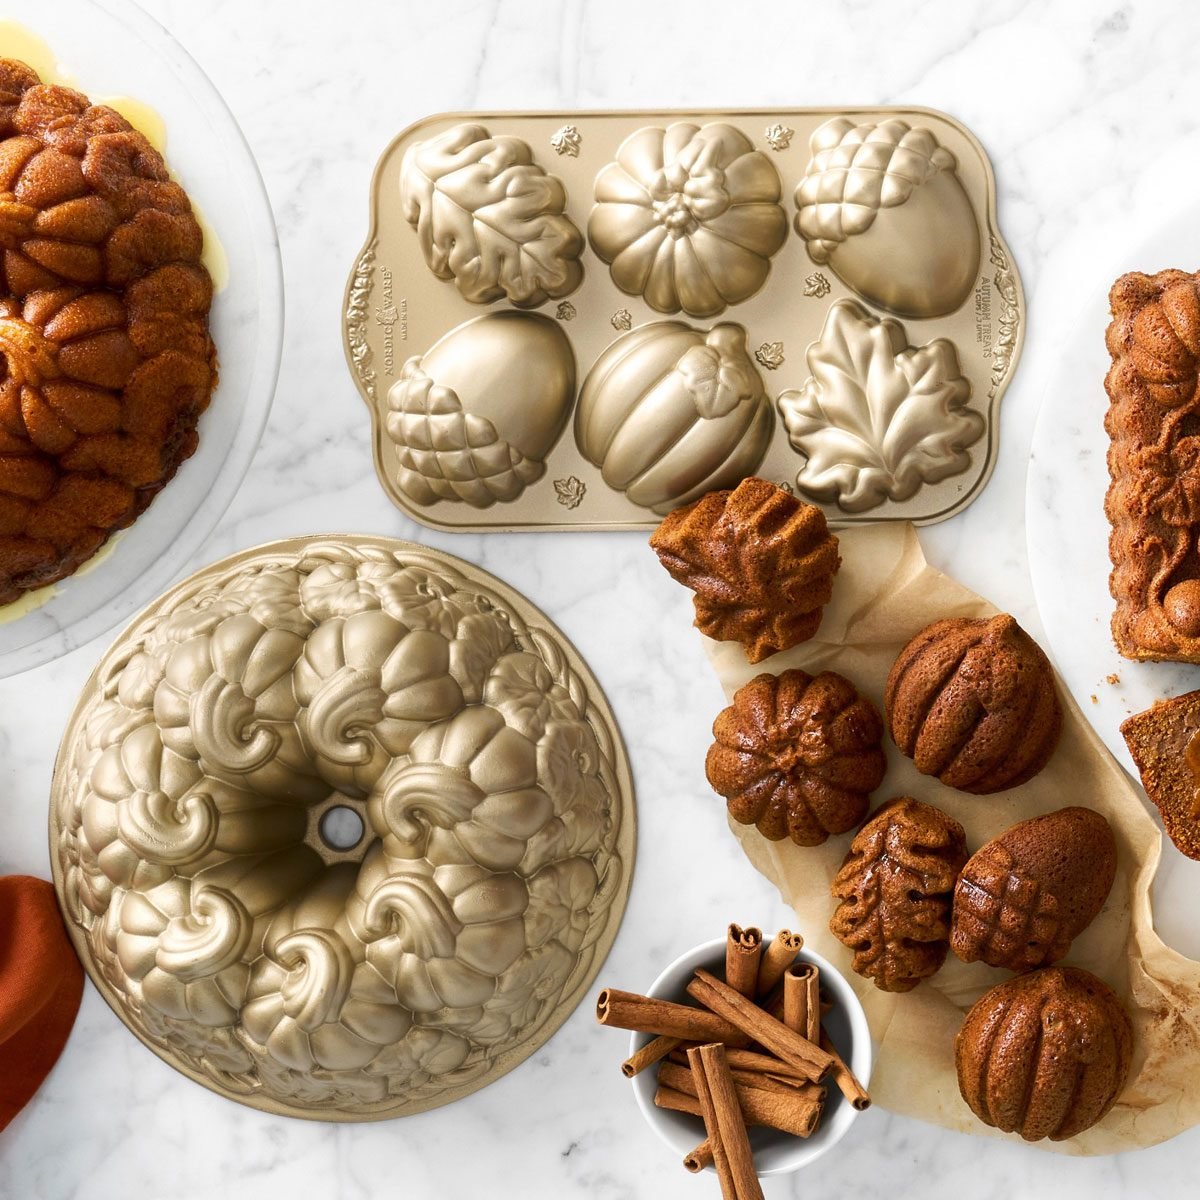 Nordic Ware's Harvest Collection Is Perfect for Fall